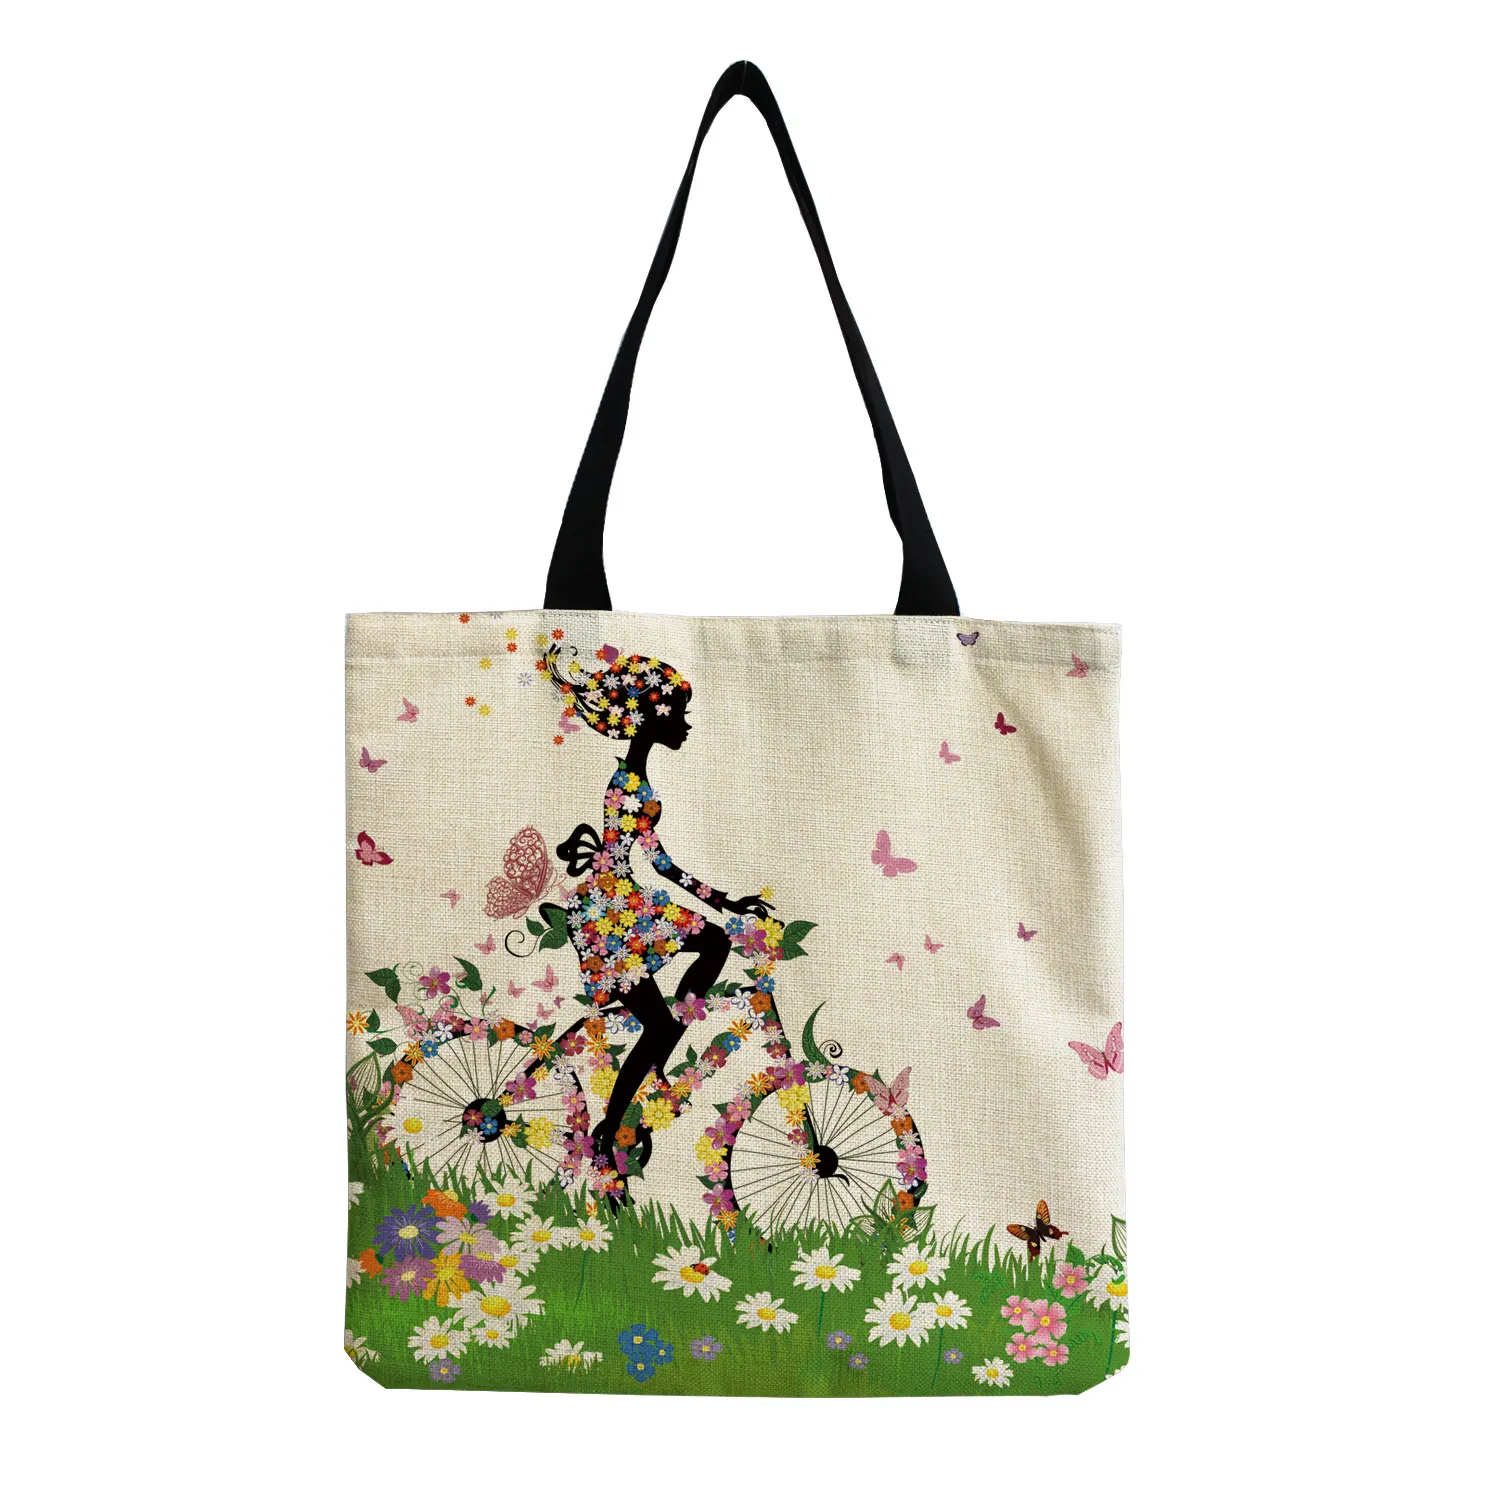 Flower Girl Print Linen Reusable Shopping Bags Women Large Tote Bags Fashion Handbags With Customized Printed Totes For Travel 